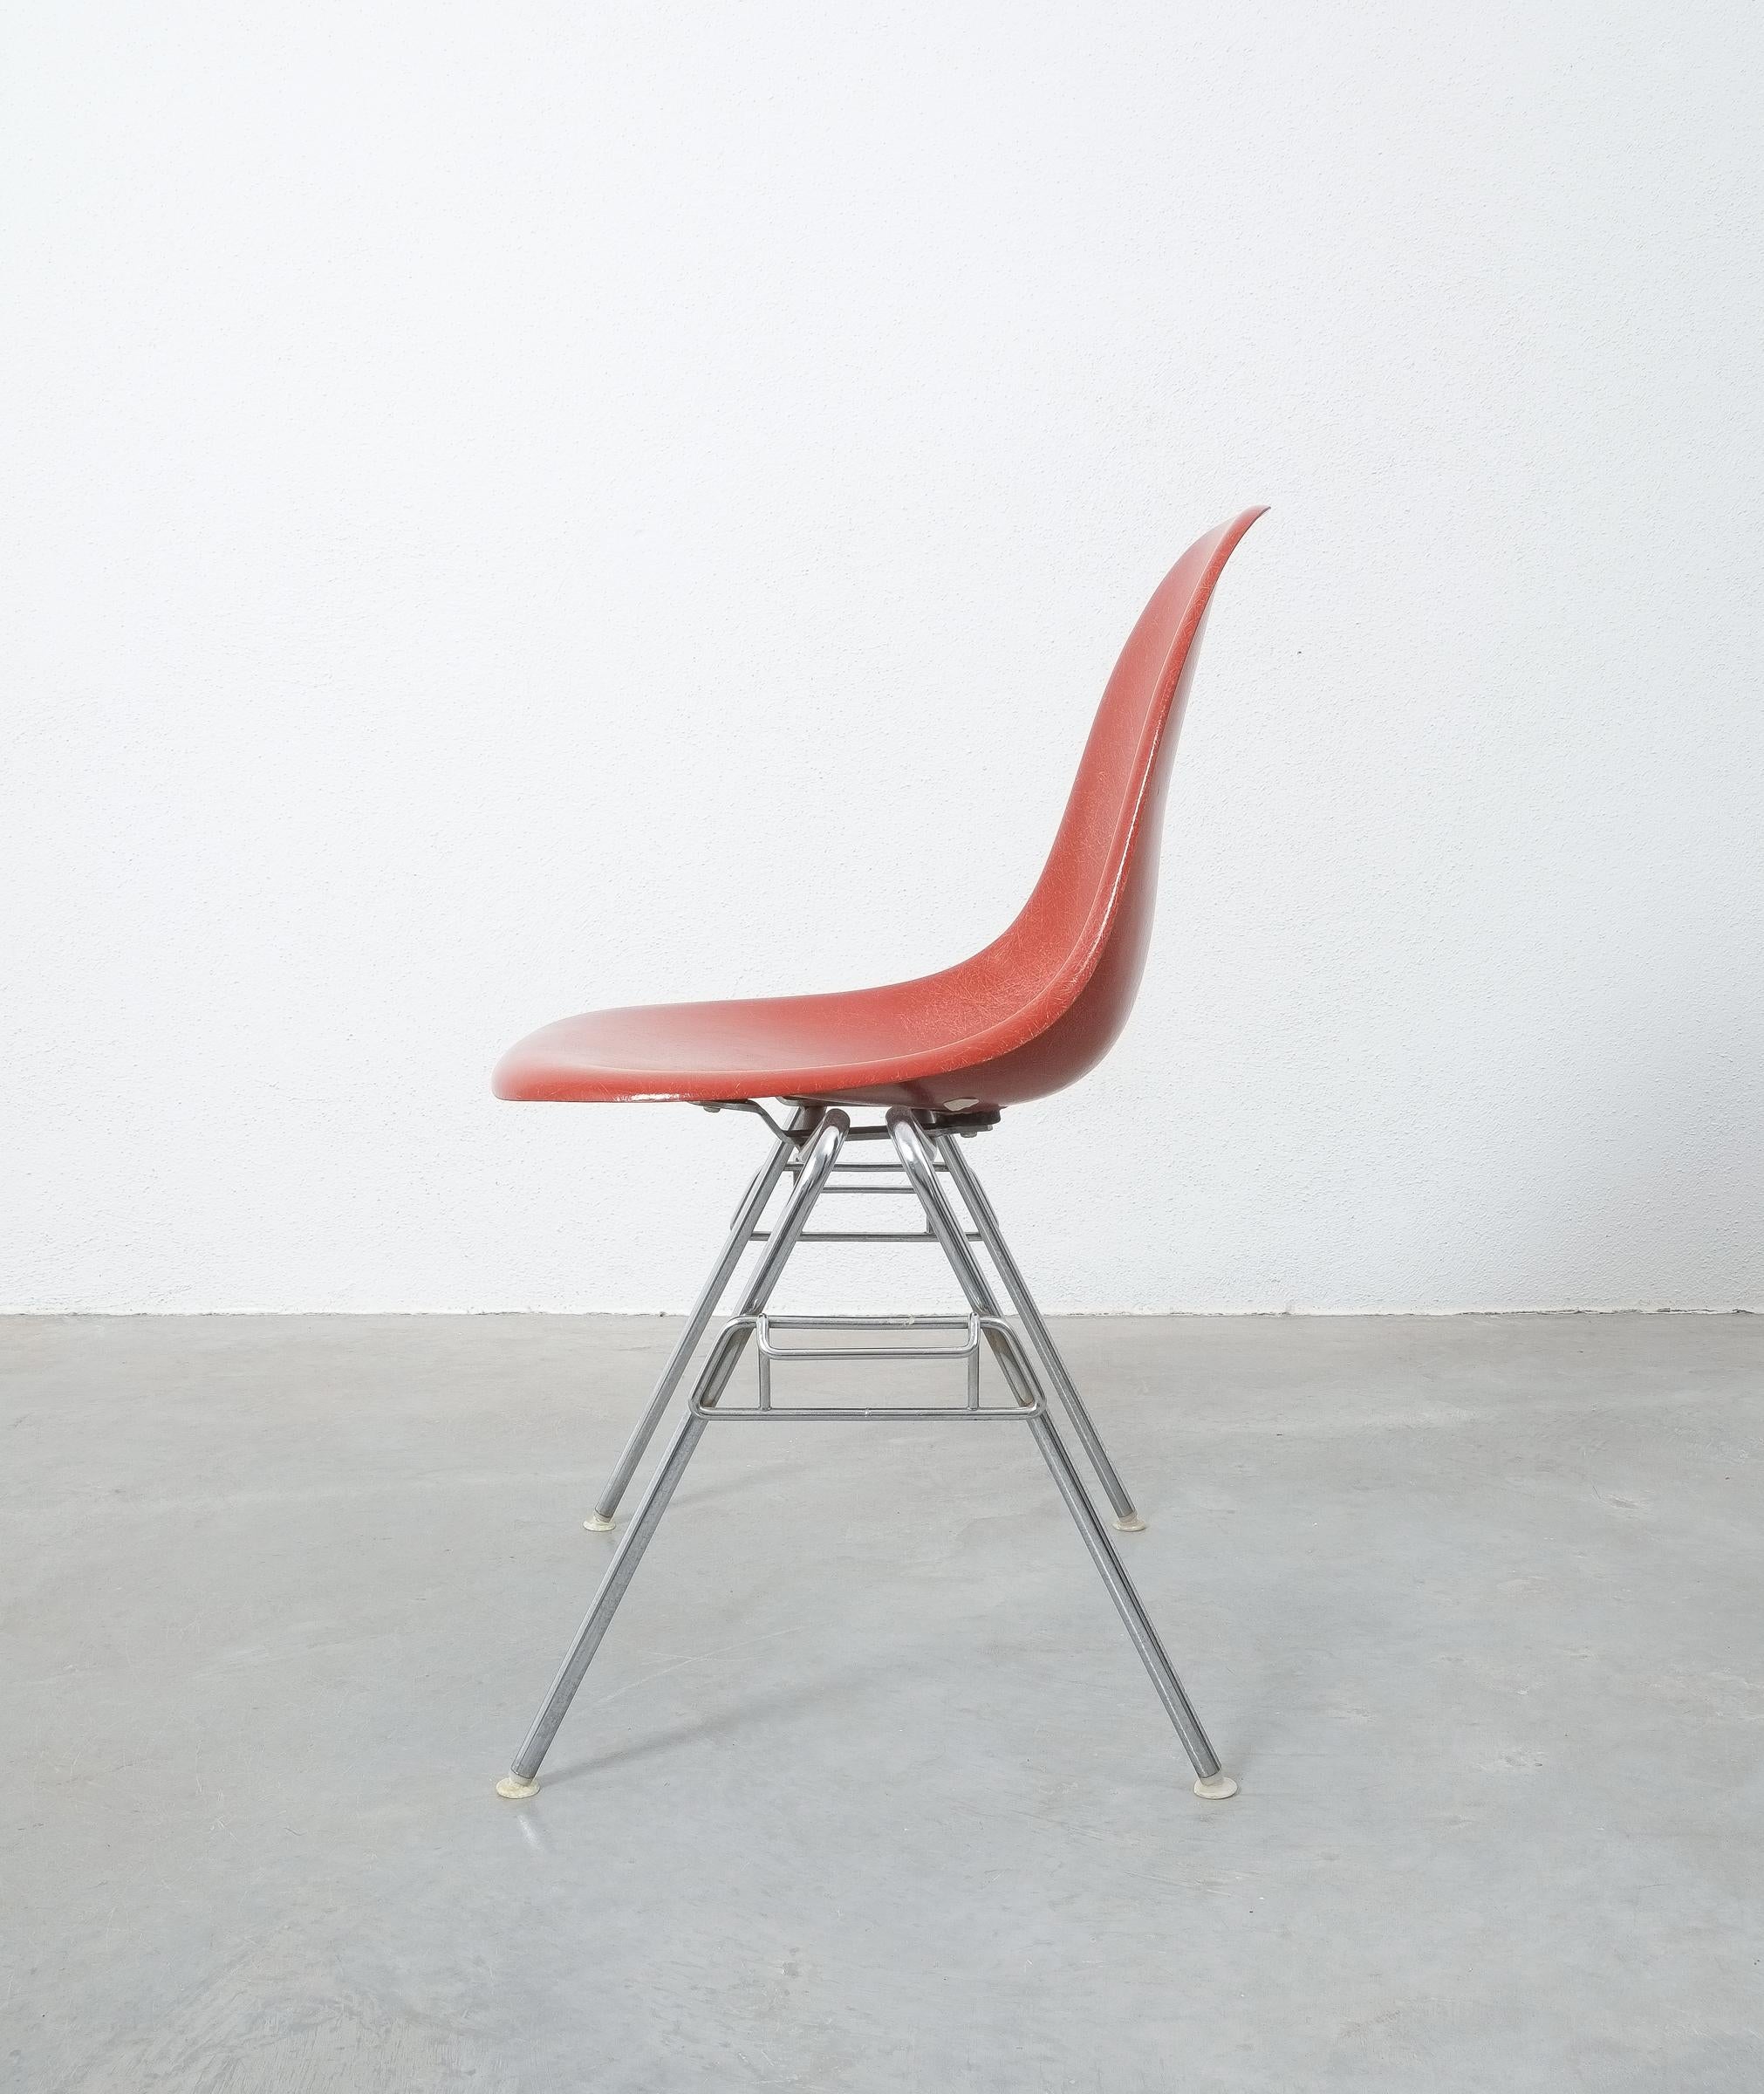 Stainless Steel Herman Miller Eames Dining Chairs Terracotta, circa 1970